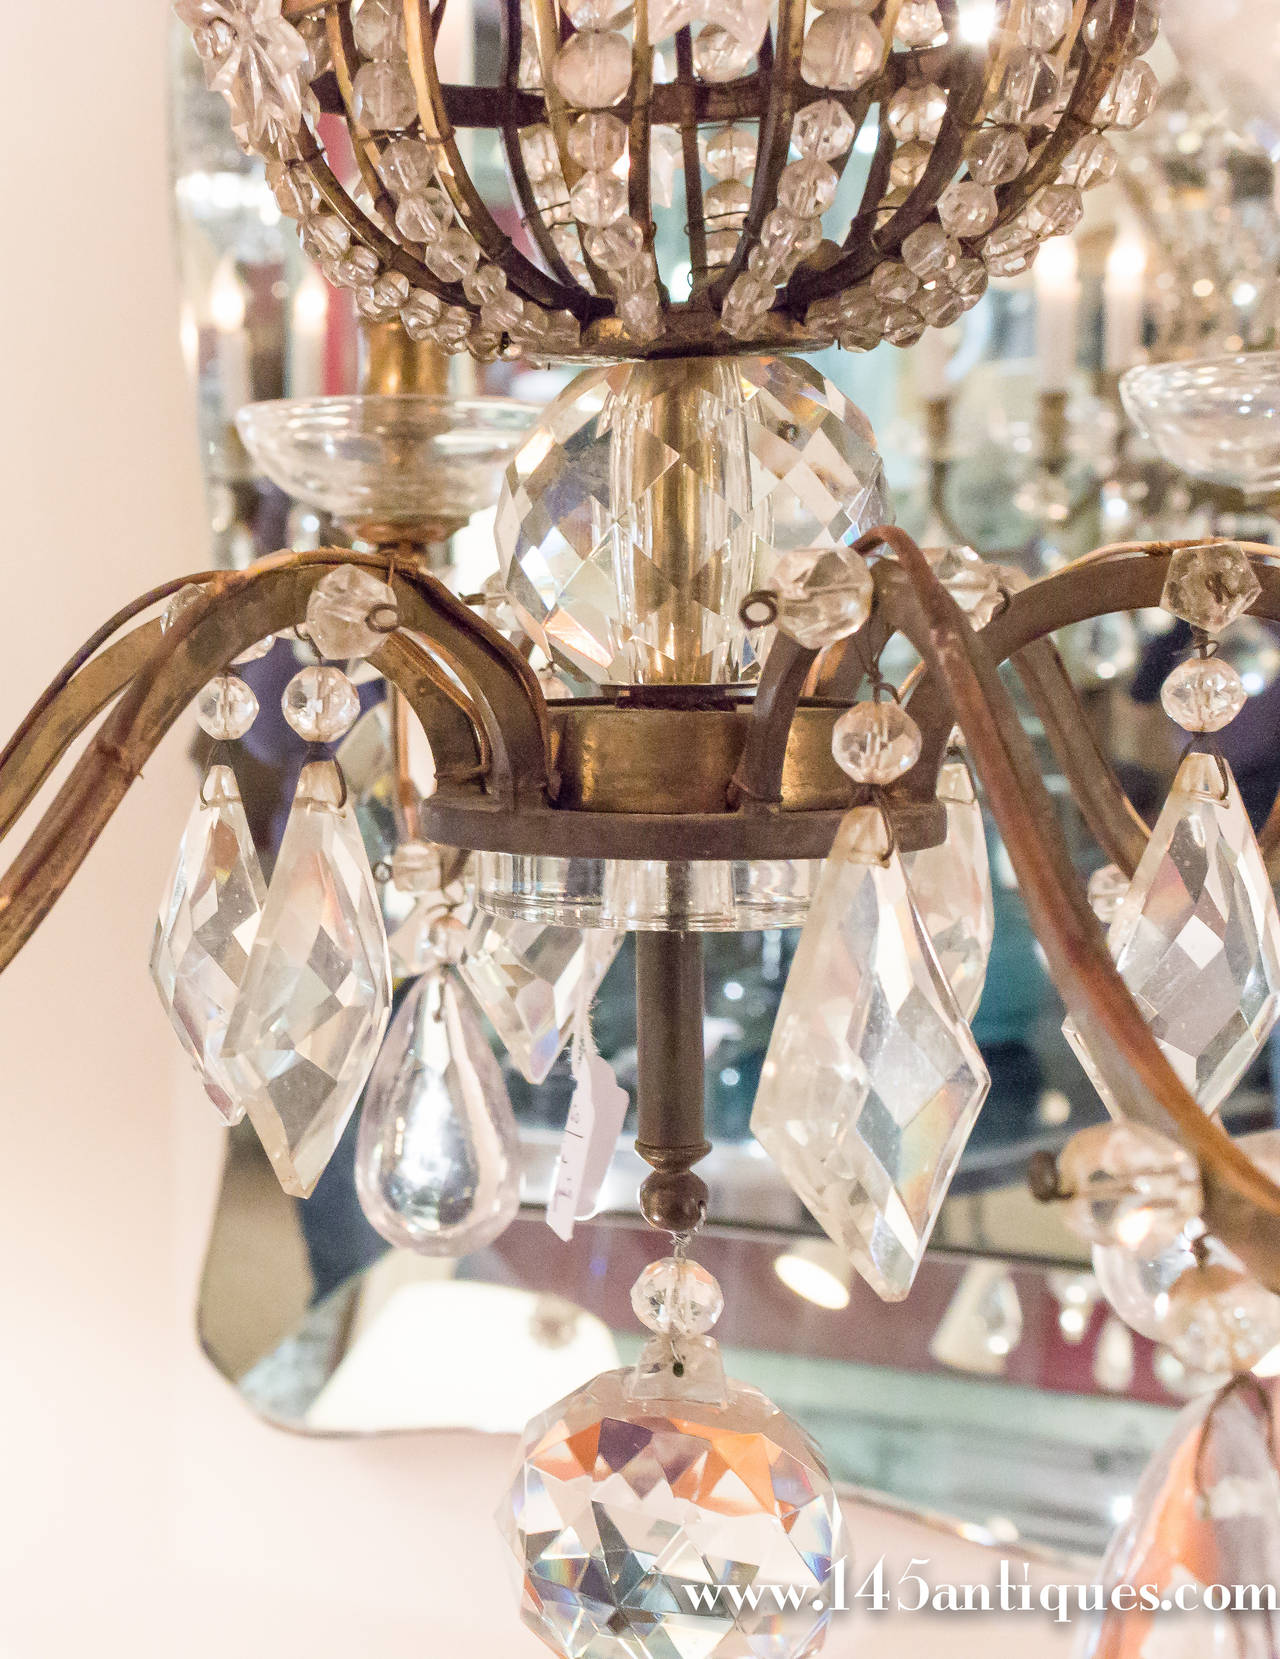 Unusual Bagues chandelier in bronze and crystal, French, 1940s.

Item located in France, please allow 4 to 6 weeks delivery to New York City. Price includes regular shipping to New York. Expedited shipping available upon request.